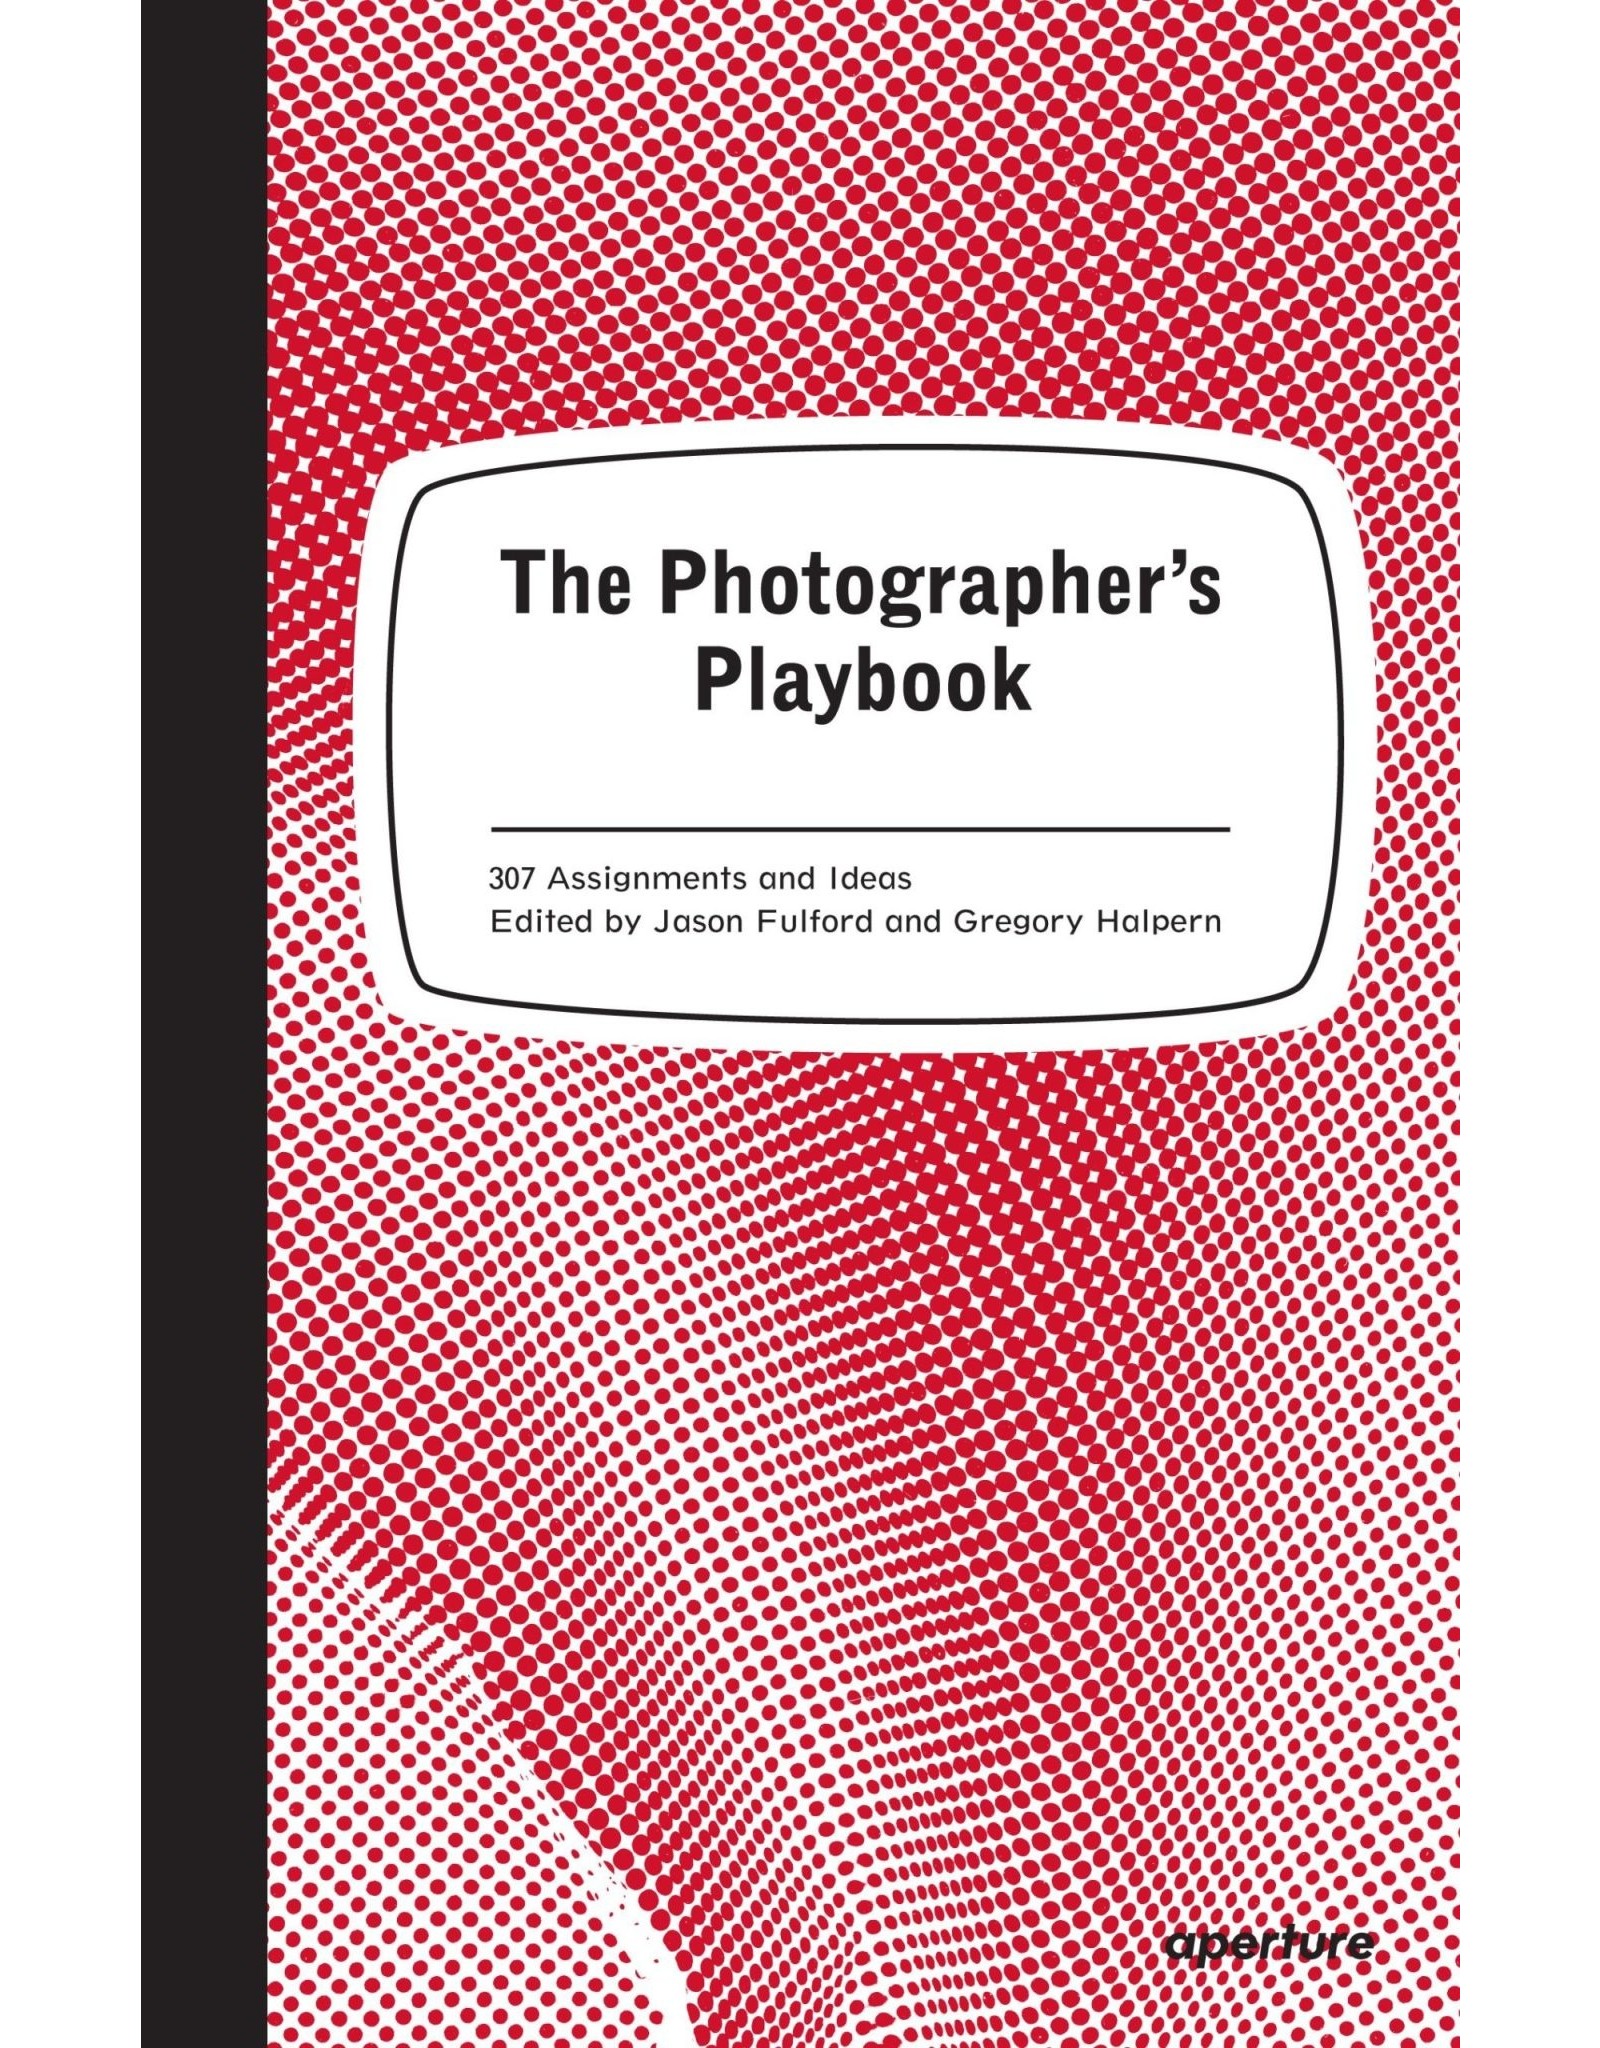 The Photographer’s Playbook - 307 Assignments and Ideas